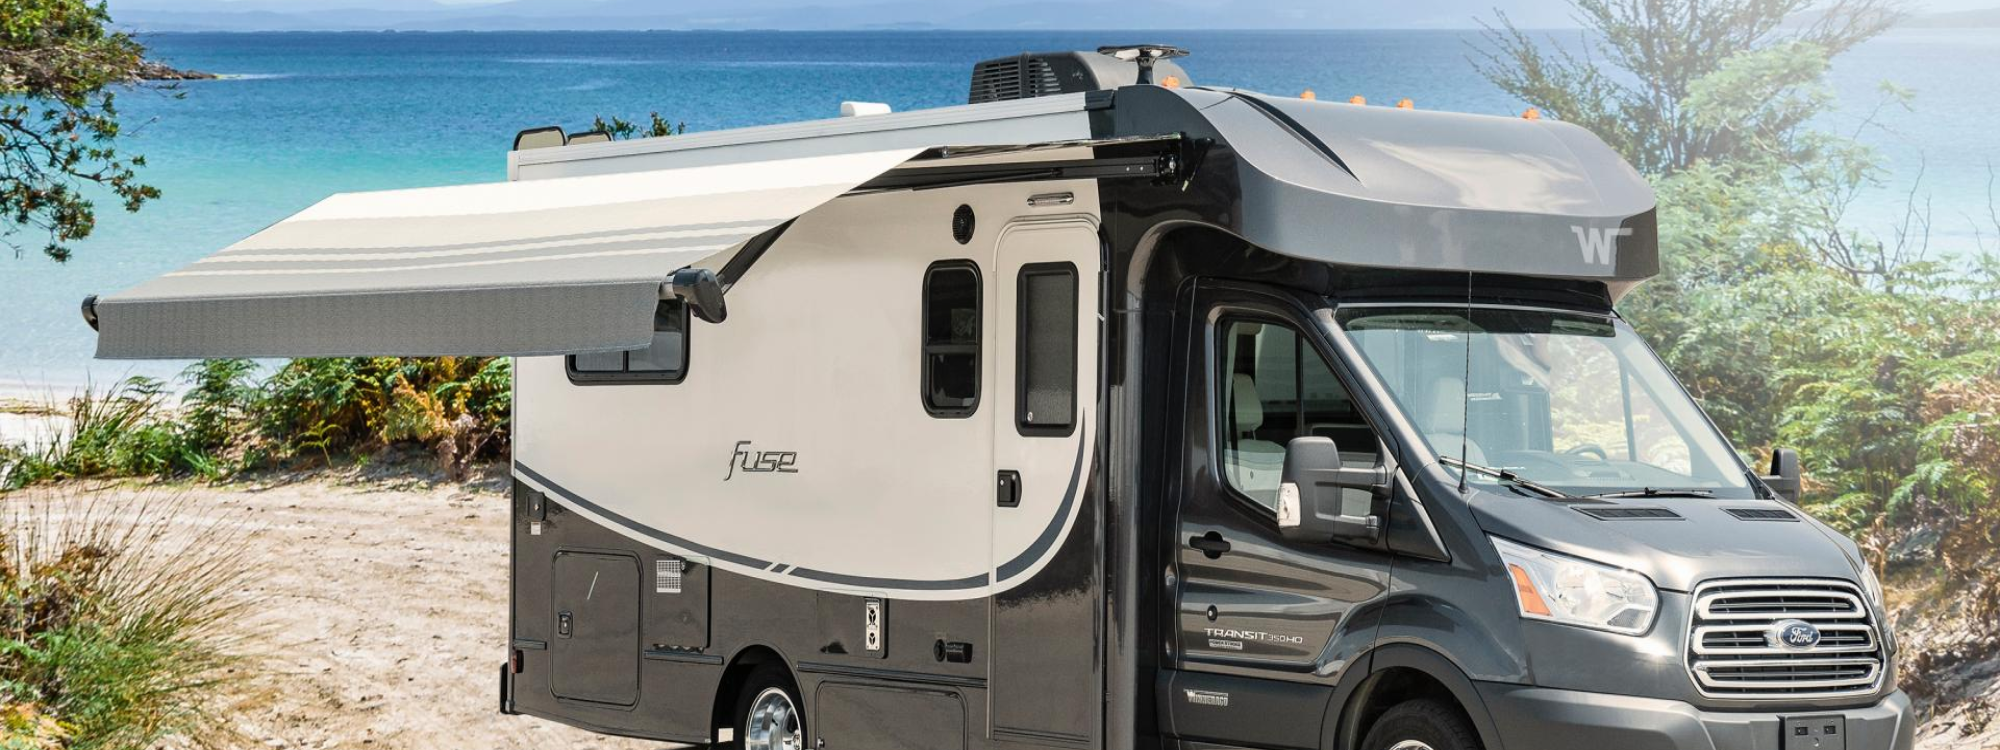 Winnebago Fuse exterior view with awning extended, on a sandy dune with water in the background